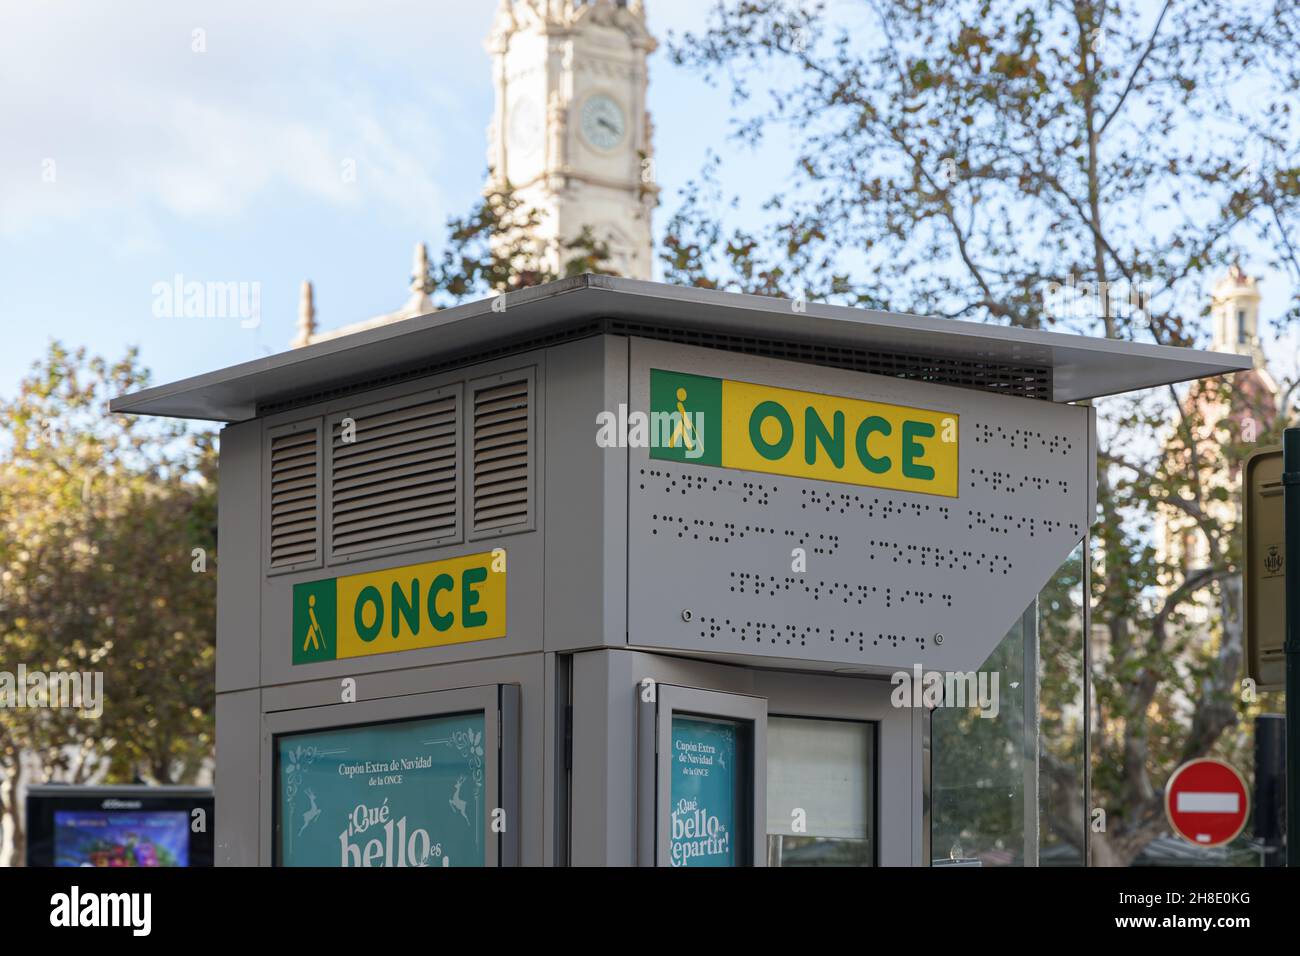 VALENCIA, SPAIN - NOVEMBER 29, 2021: ONCE is a Spanish foundation to raise funds to provide services for blind people Stock Photo